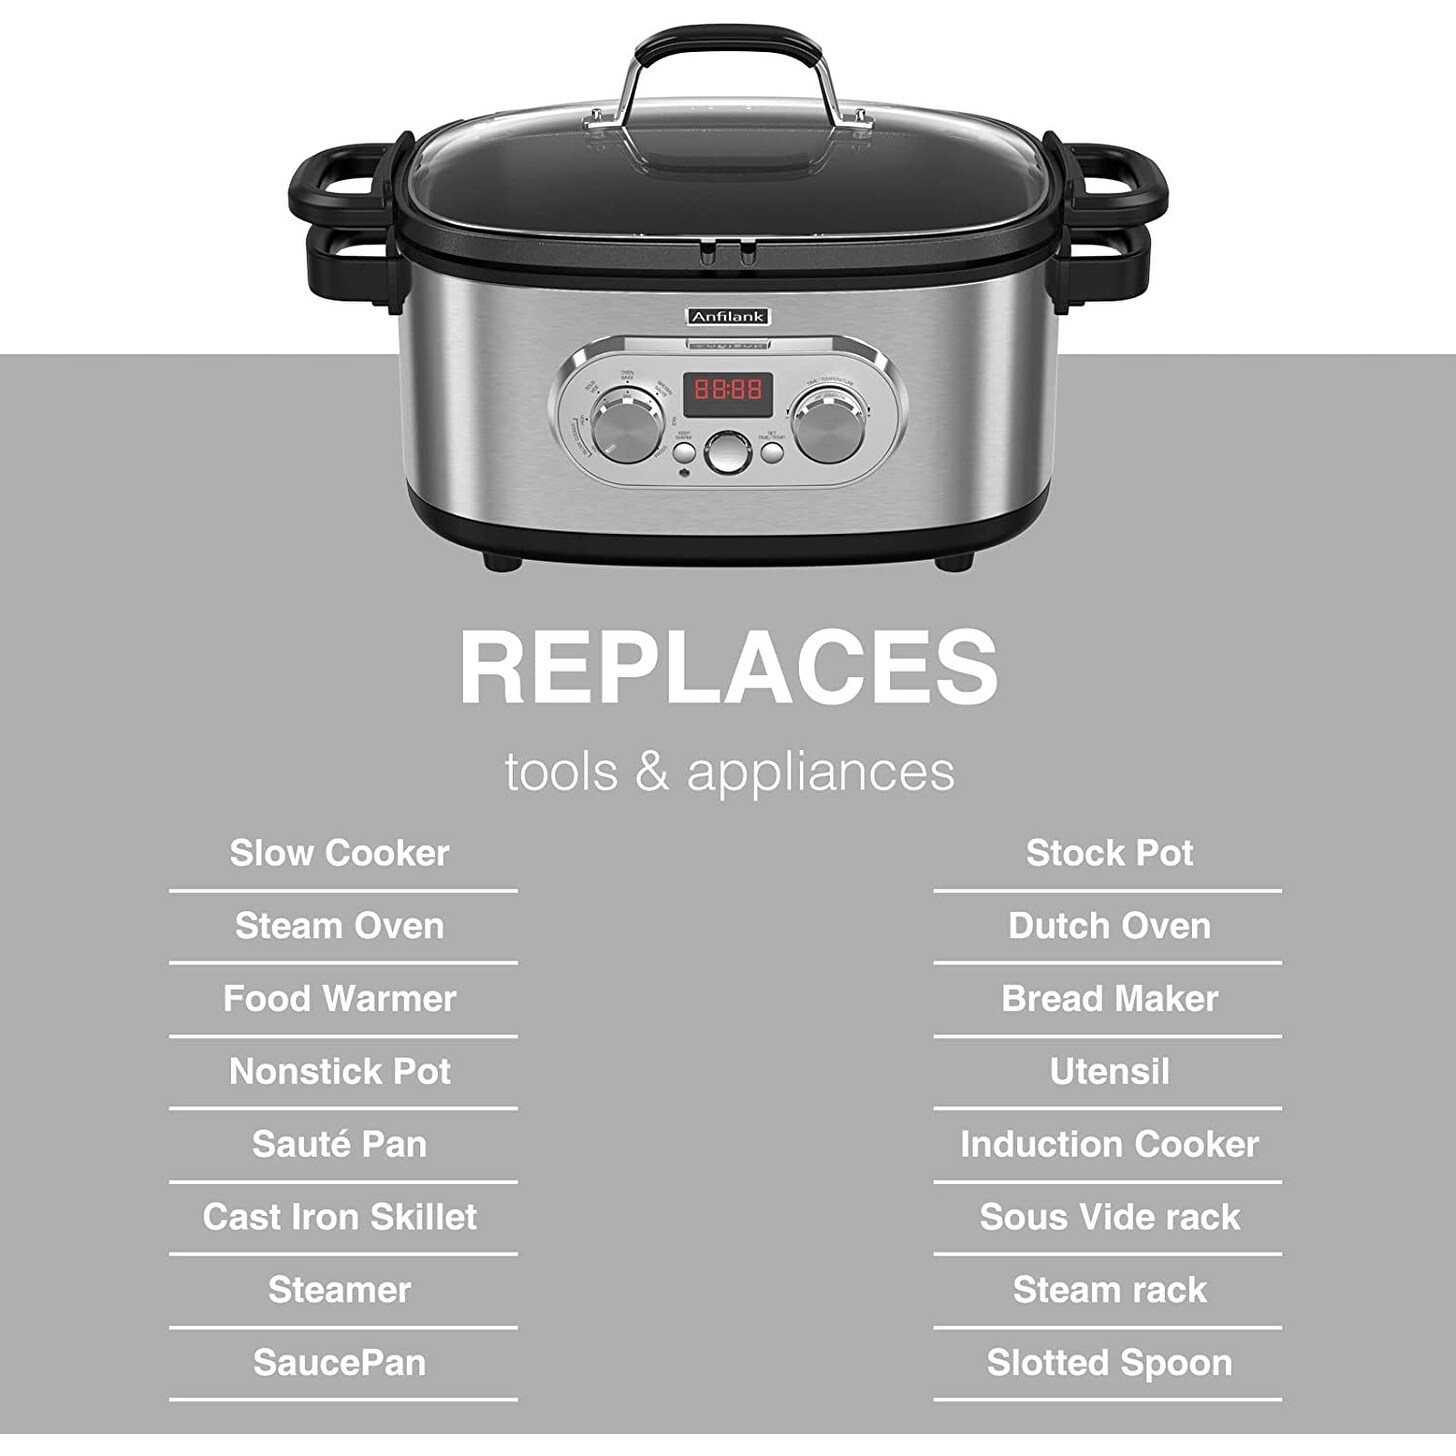 https://ak1.ostkcdn.com/images/products/is/images/direct/c627d70006641ff7ef9800acbd3a88f8b2d2f2b1/8-in-1-Multi-Cooker%2C-Programmable-6.8-Quart-Slow-Cooker%2C-Slotted-Spoon-and-Glass-Lid%2C-Adjustable-Temp.jpg